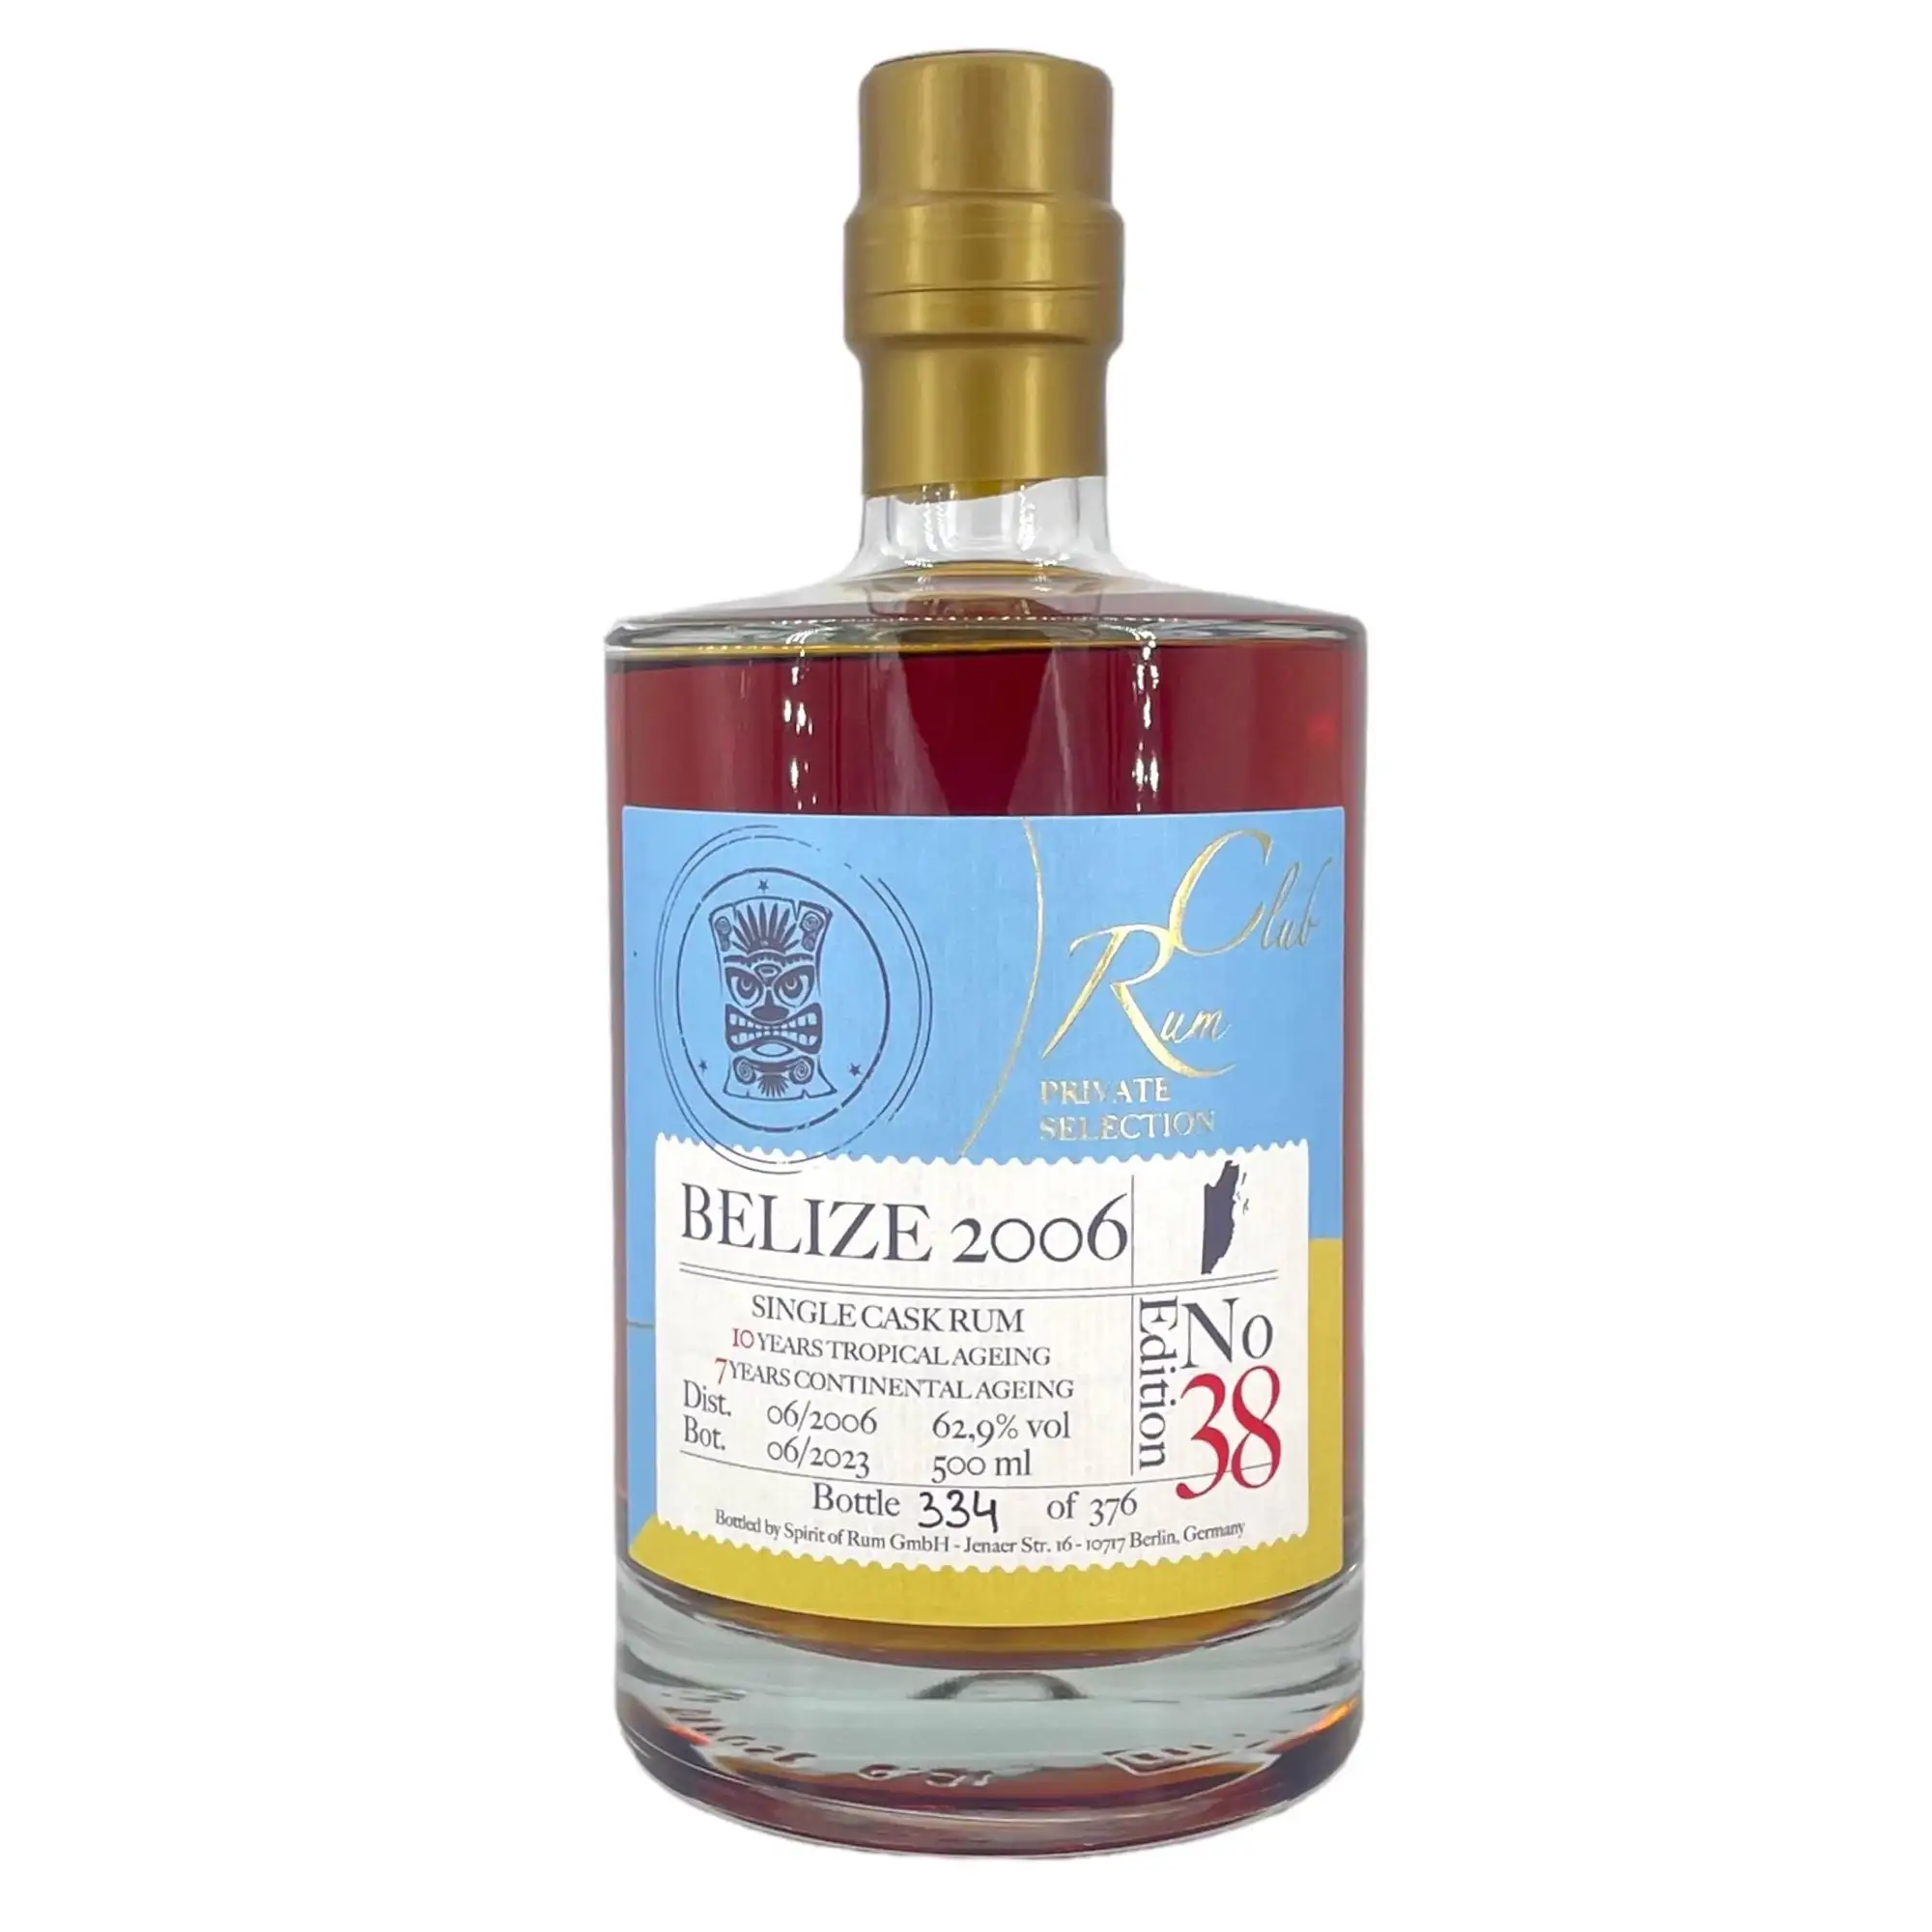 Image of the front of the bottle of the rum Rumclub Private Selection Ed. 38 Belize Rum